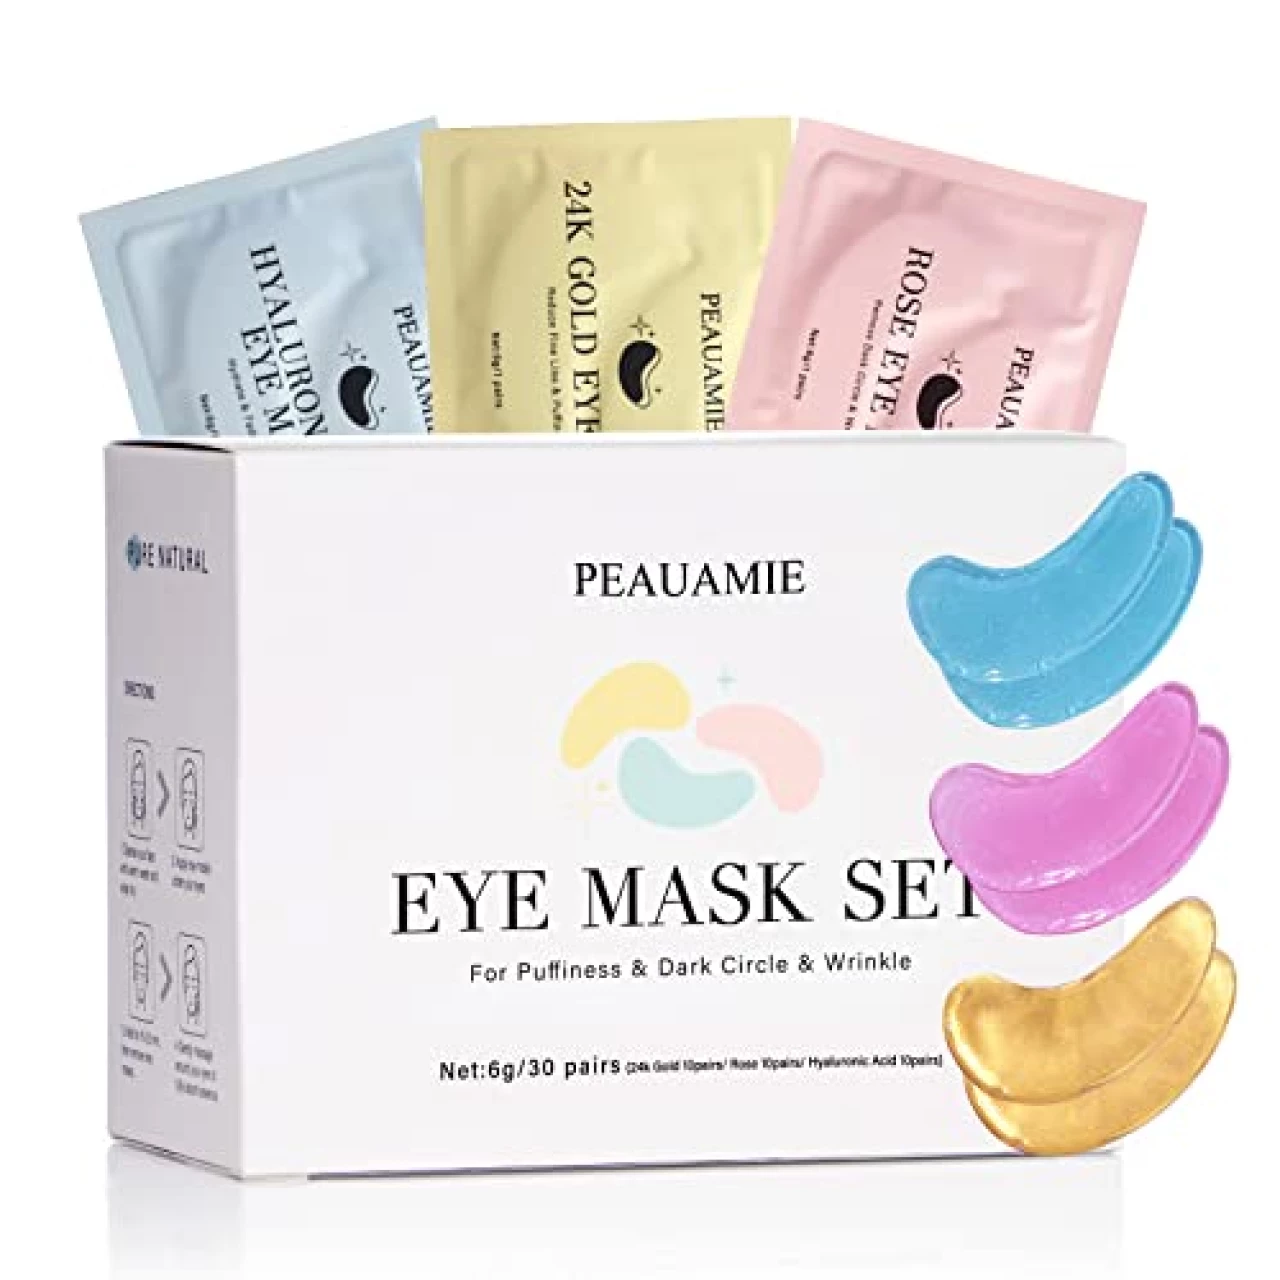 PEAUAMIE Under Eye Patches (30 Pairs) Gold Eye Mask and Hyaluronic Acid Eye Patches for puffy eyes, Rose Eye Masks for Dark Circles and Puffiness under eye treatment skin care products…